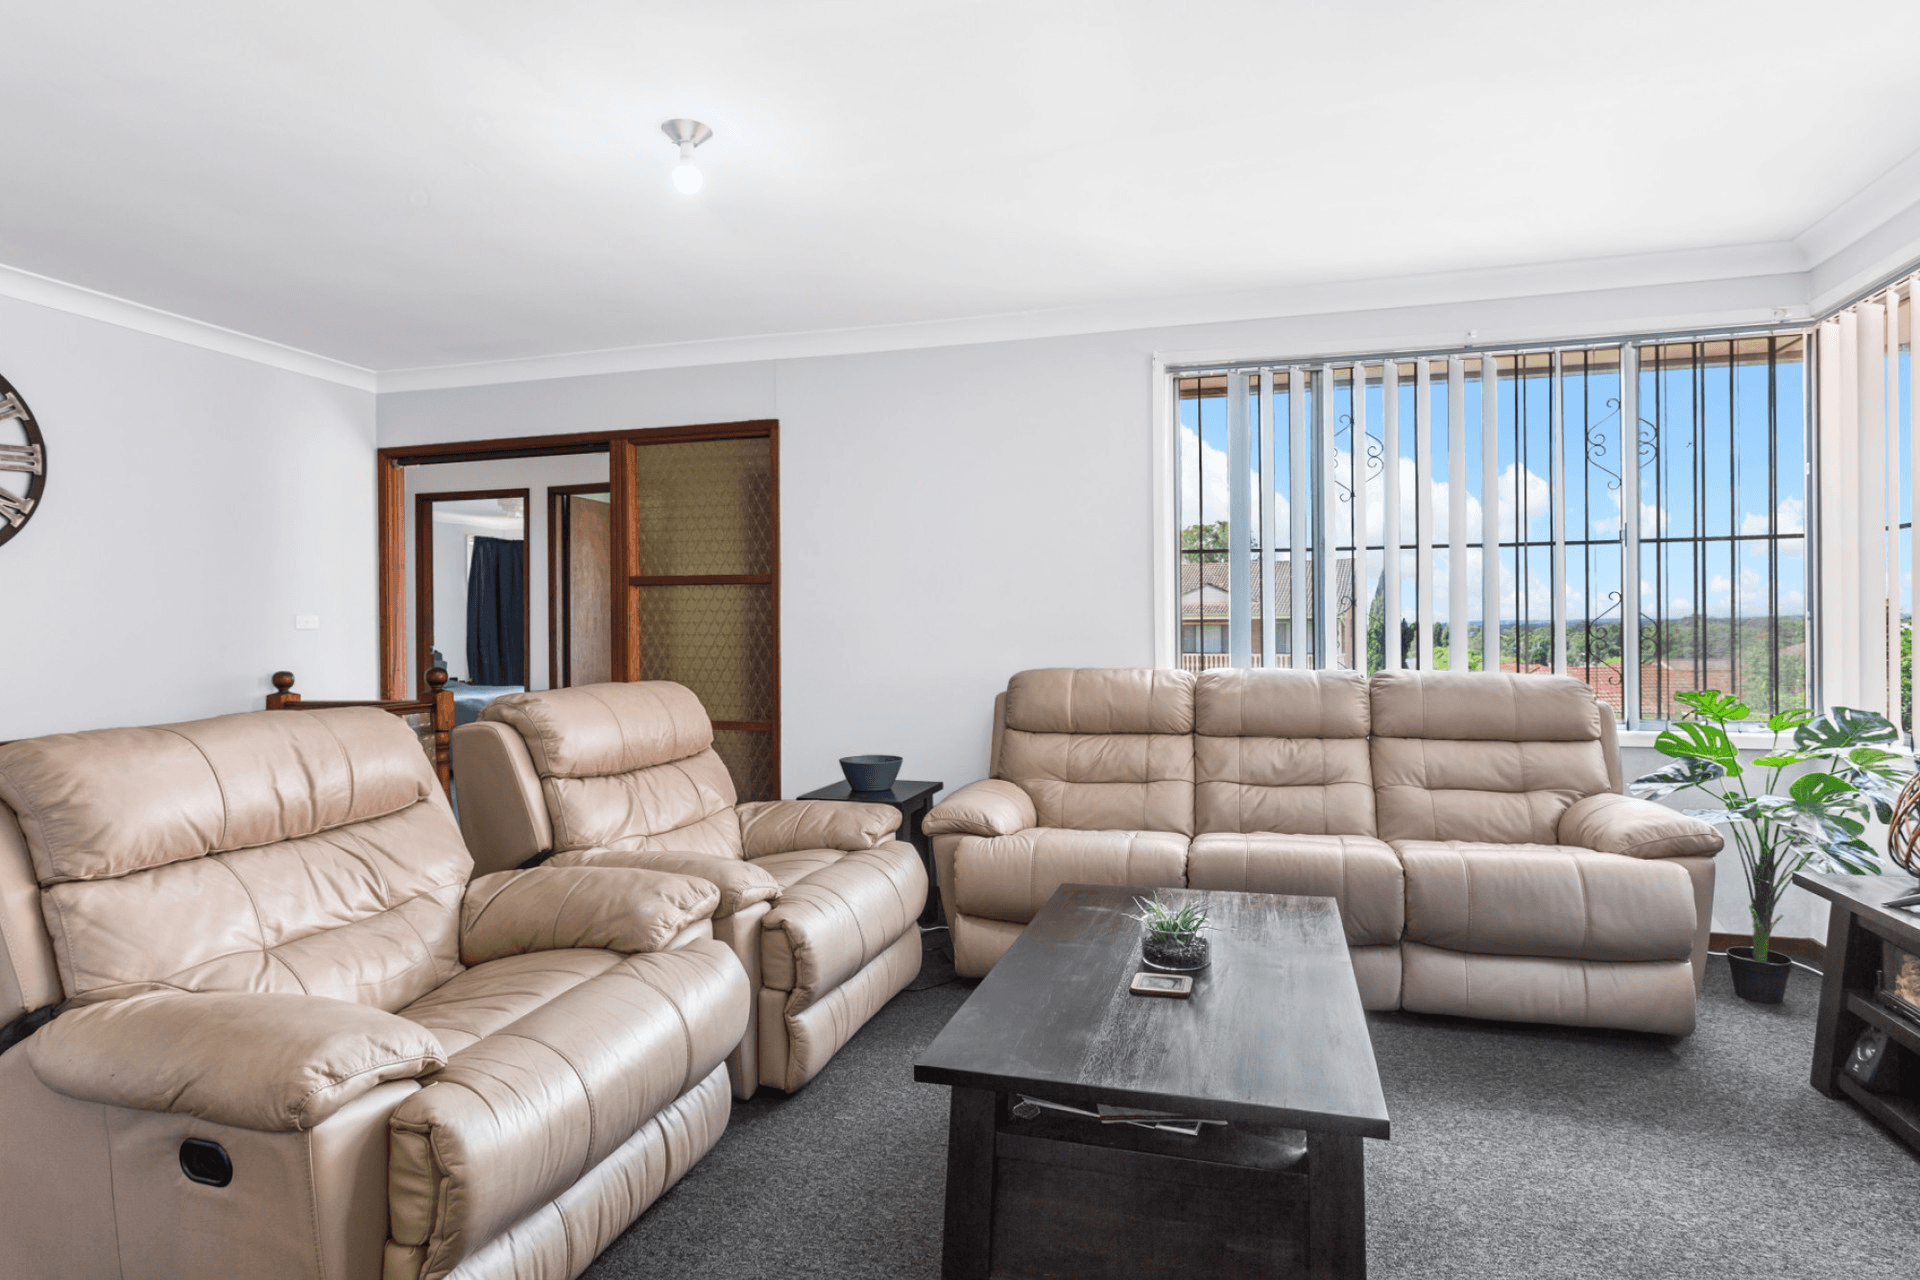 21 Congressional Drive, Liverpool, NSW 2170